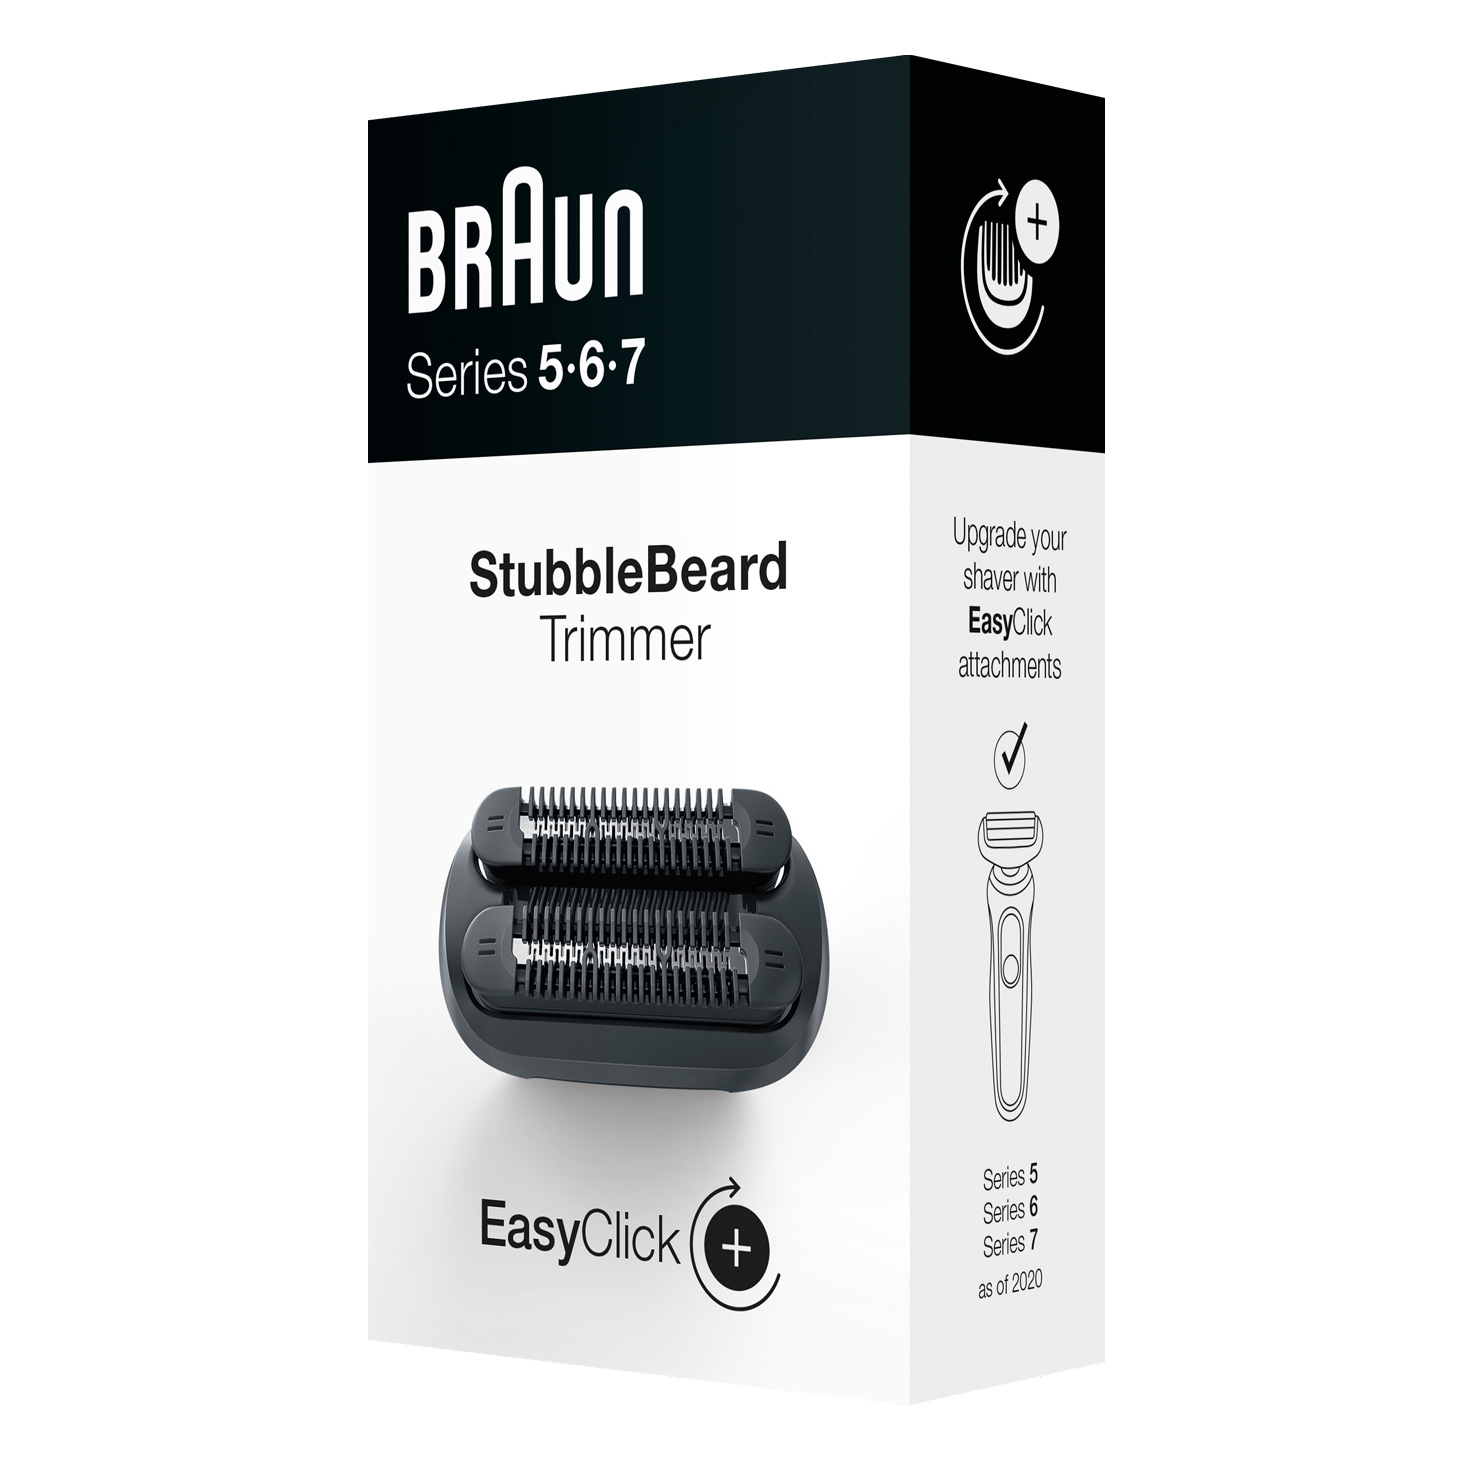 EasyClick Stubble Beard Trimmer attachment for Braun Series 5, 6 and 7 electric shaver 